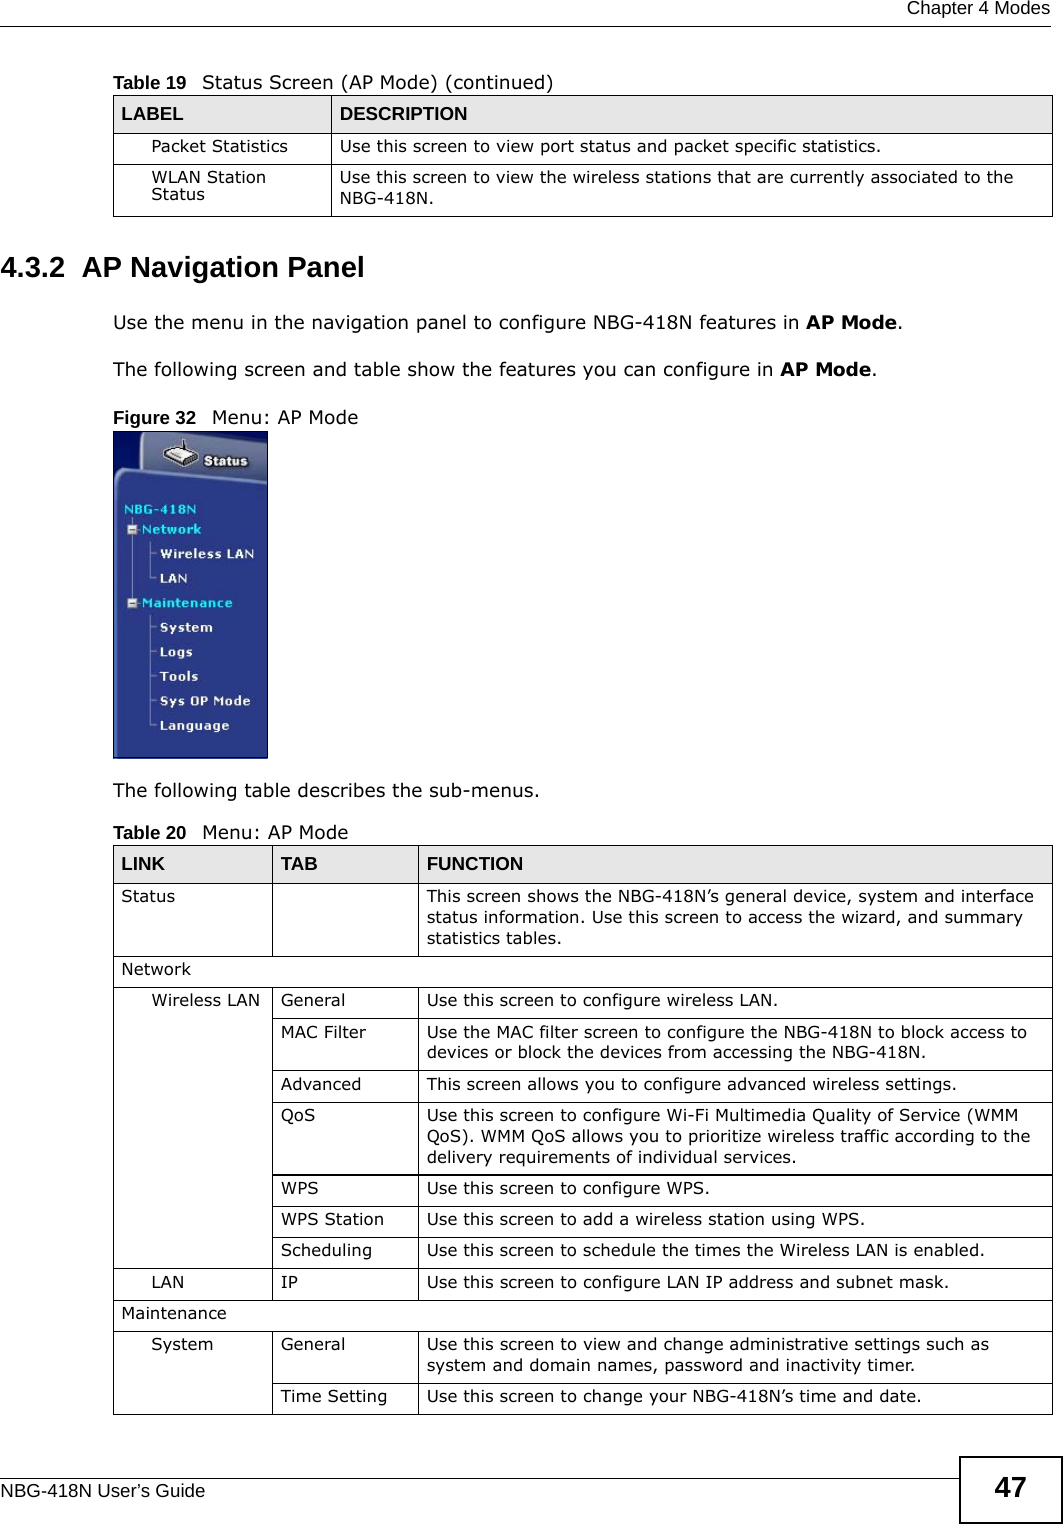  Chapter 4 ModesNBG-418N User’s Guide 474.3.2  AP Navigation PanelUse the menu in the navigation panel to configure NBG-418N features in AP Mode.The following screen and table show the features you can configure in AP Mode.Figure 32   Menu: AP ModeThe following table describes the sub-menus.Packet Statistics Use this screen to view port status and packet specific statistics.WLAN Station Status Use this screen to view the wireless stations that are currently associated to the NBG-418N.Table 19   Status Screen (AP Mode) (continued)LABEL DESCRIPTIONTable 20   Menu: AP ModeLINK TAB FUNCTIONStatus This screen shows the NBG-418N’s general device, system and interface status information. Use this screen to access the wizard, and summary statistics tables.NetworkWireless LAN General Use this screen to configure wireless LAN.MAC Filter Use the MAC filter screen to configure the NBG-418N to block access to devices or block the devices from accessing the NBG-418N.Advanced This screen allows you to configure advanced wireless settings.QoS Use this screen to configure Wi-Fi Multimedia Quality of Service (WMM QoS). WMM QoS allows you to prioritize wireless traffic according to the delivery requirements of individual services.WPS Use this screen to configure WPS.WPS Station Use this screen to add a wireless station using WPS.Scheduling Use this screen to schedule the times the Wireless LAN is enabled.LAN IP Use this screen to configure LAN IP address and subnet mask.MaintenanceSystem General Use this screen to view and change administrative settings such as system and domain names, password and inactivity timer.Time Setting Use this screen to change your NBG-418N’s time and date.